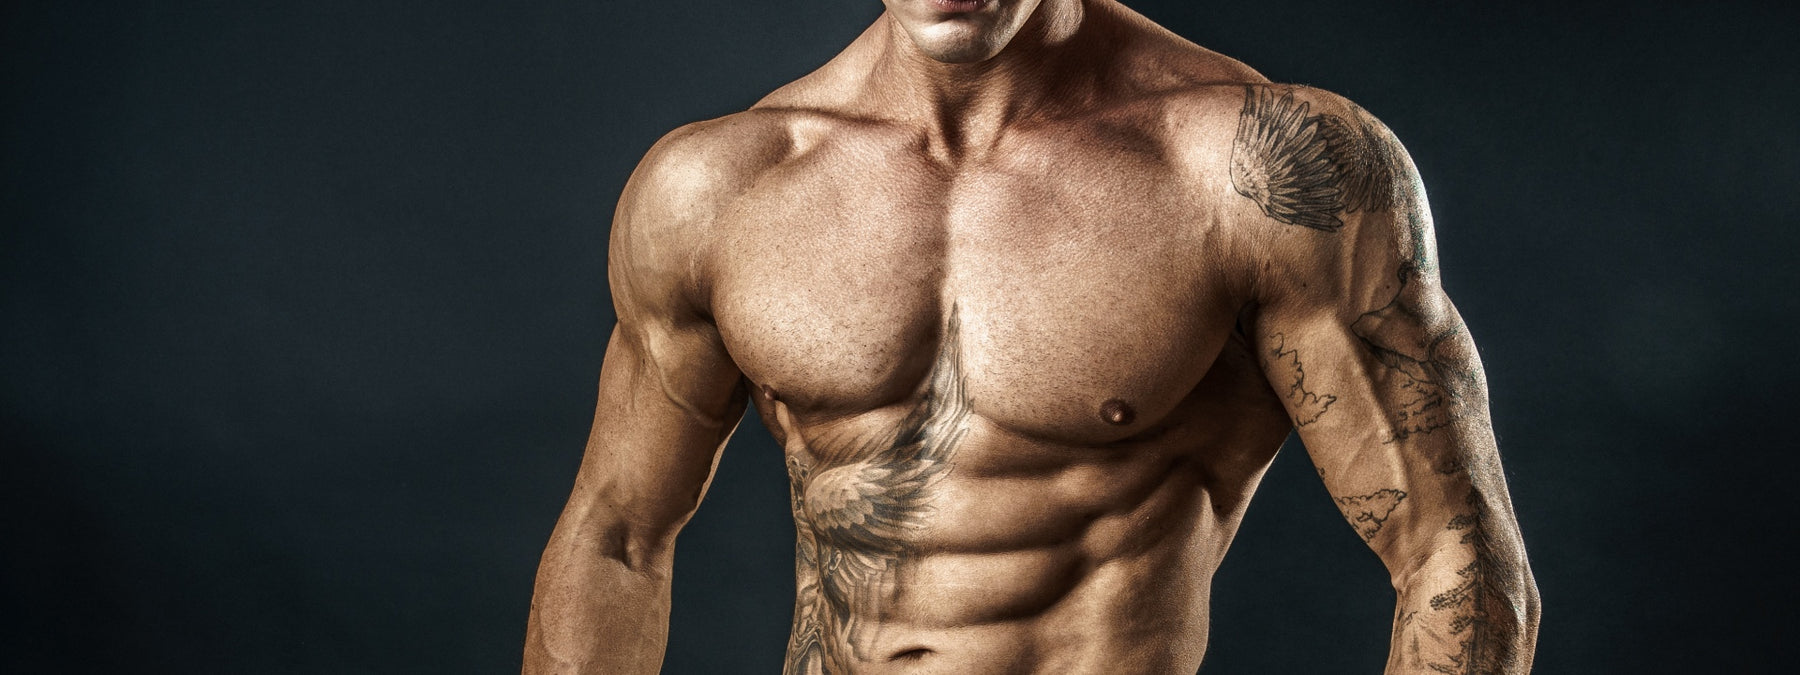 How to Get a Bigger Chest: The Intermediate's Guide